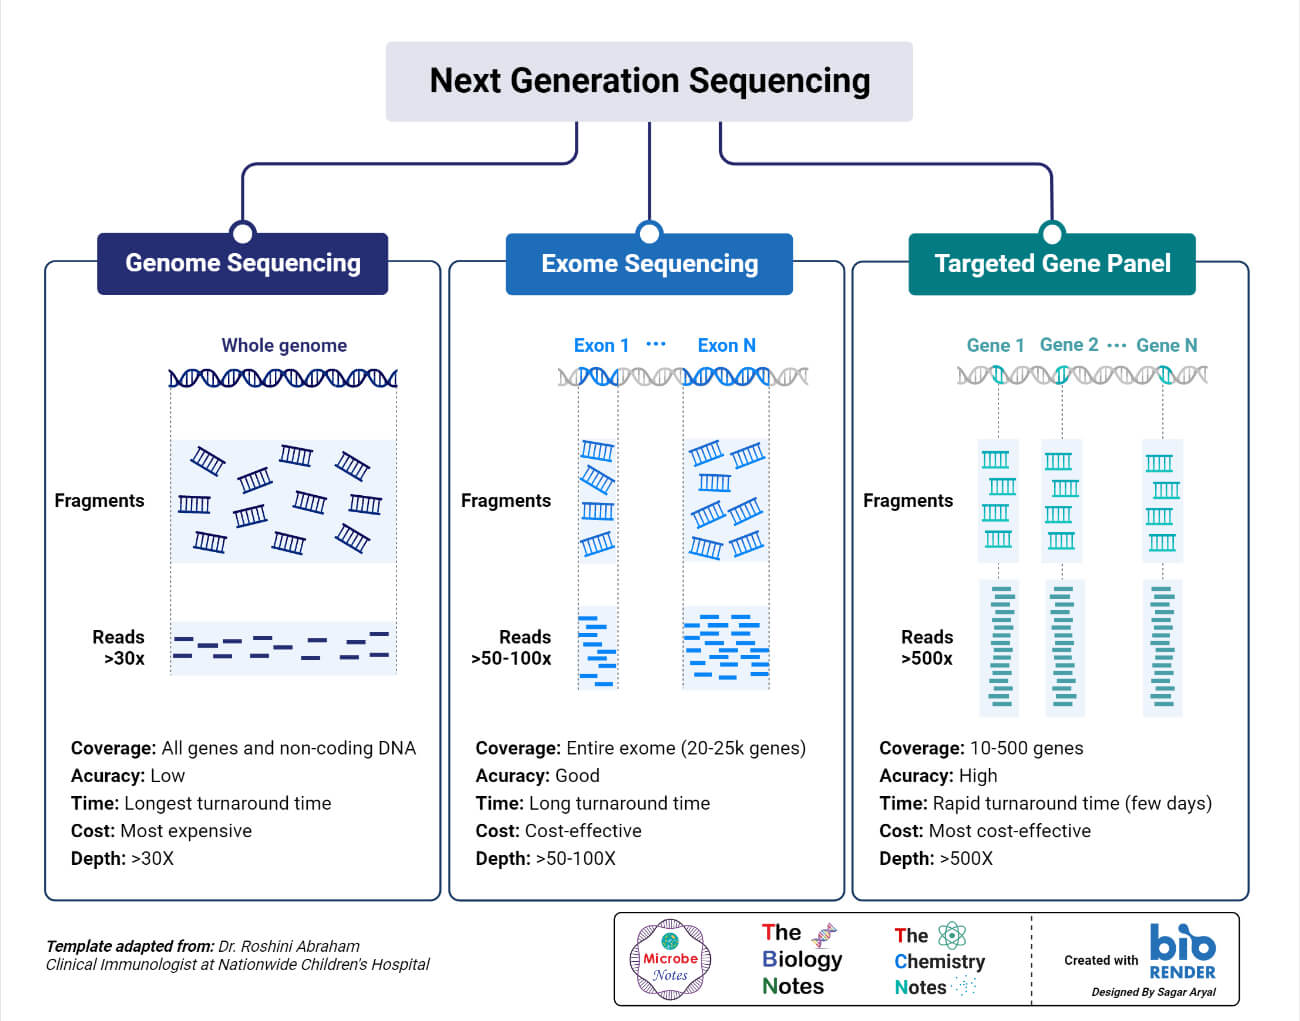 Next Generation Sequencing (NGS) Techniques